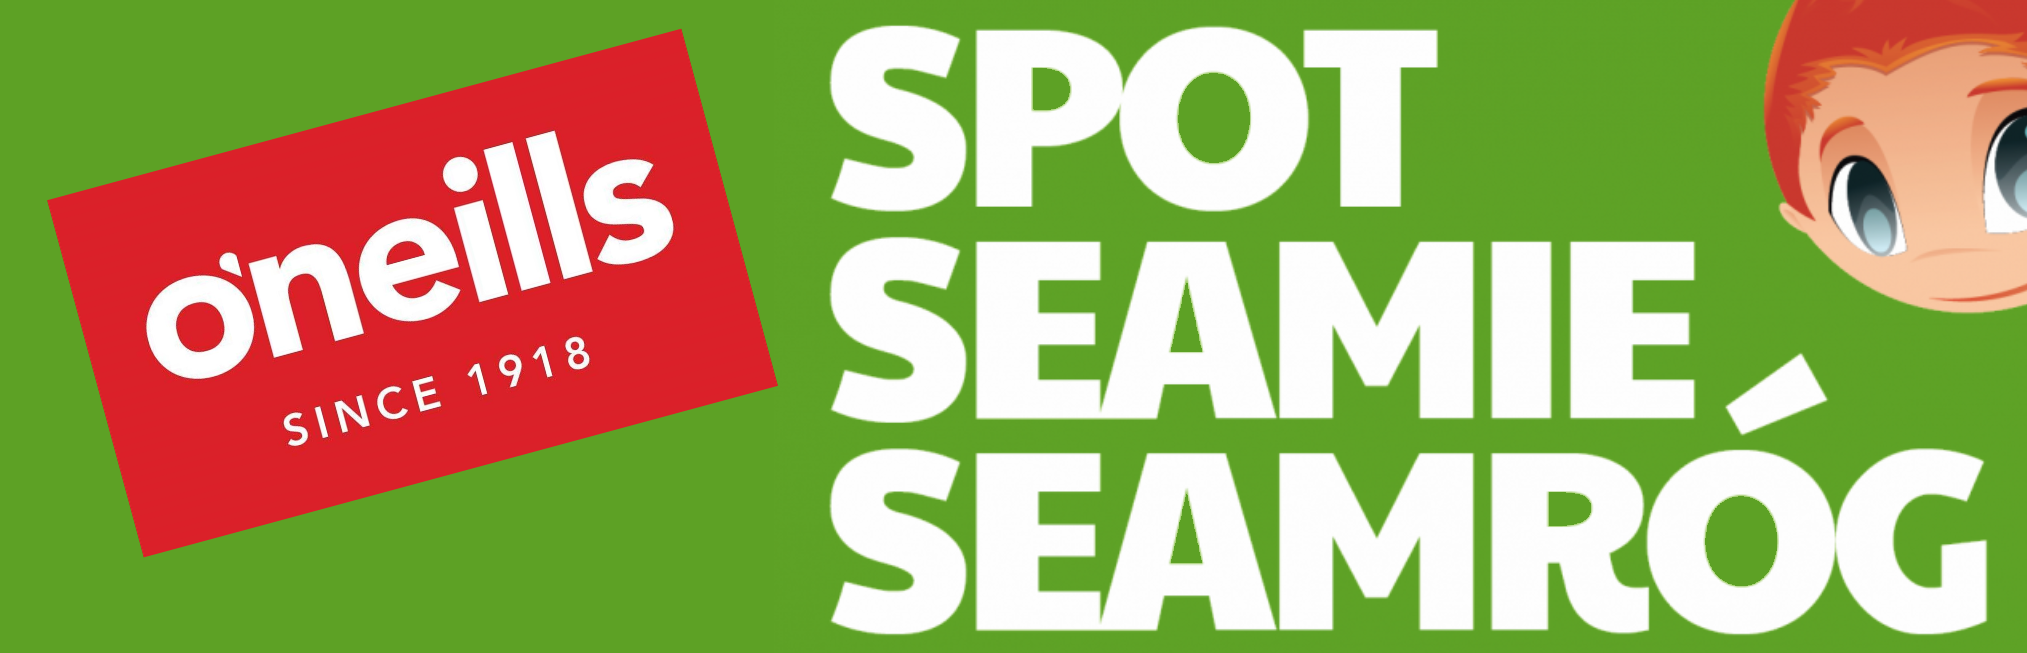 Spot Seamie this September in Issue 124 